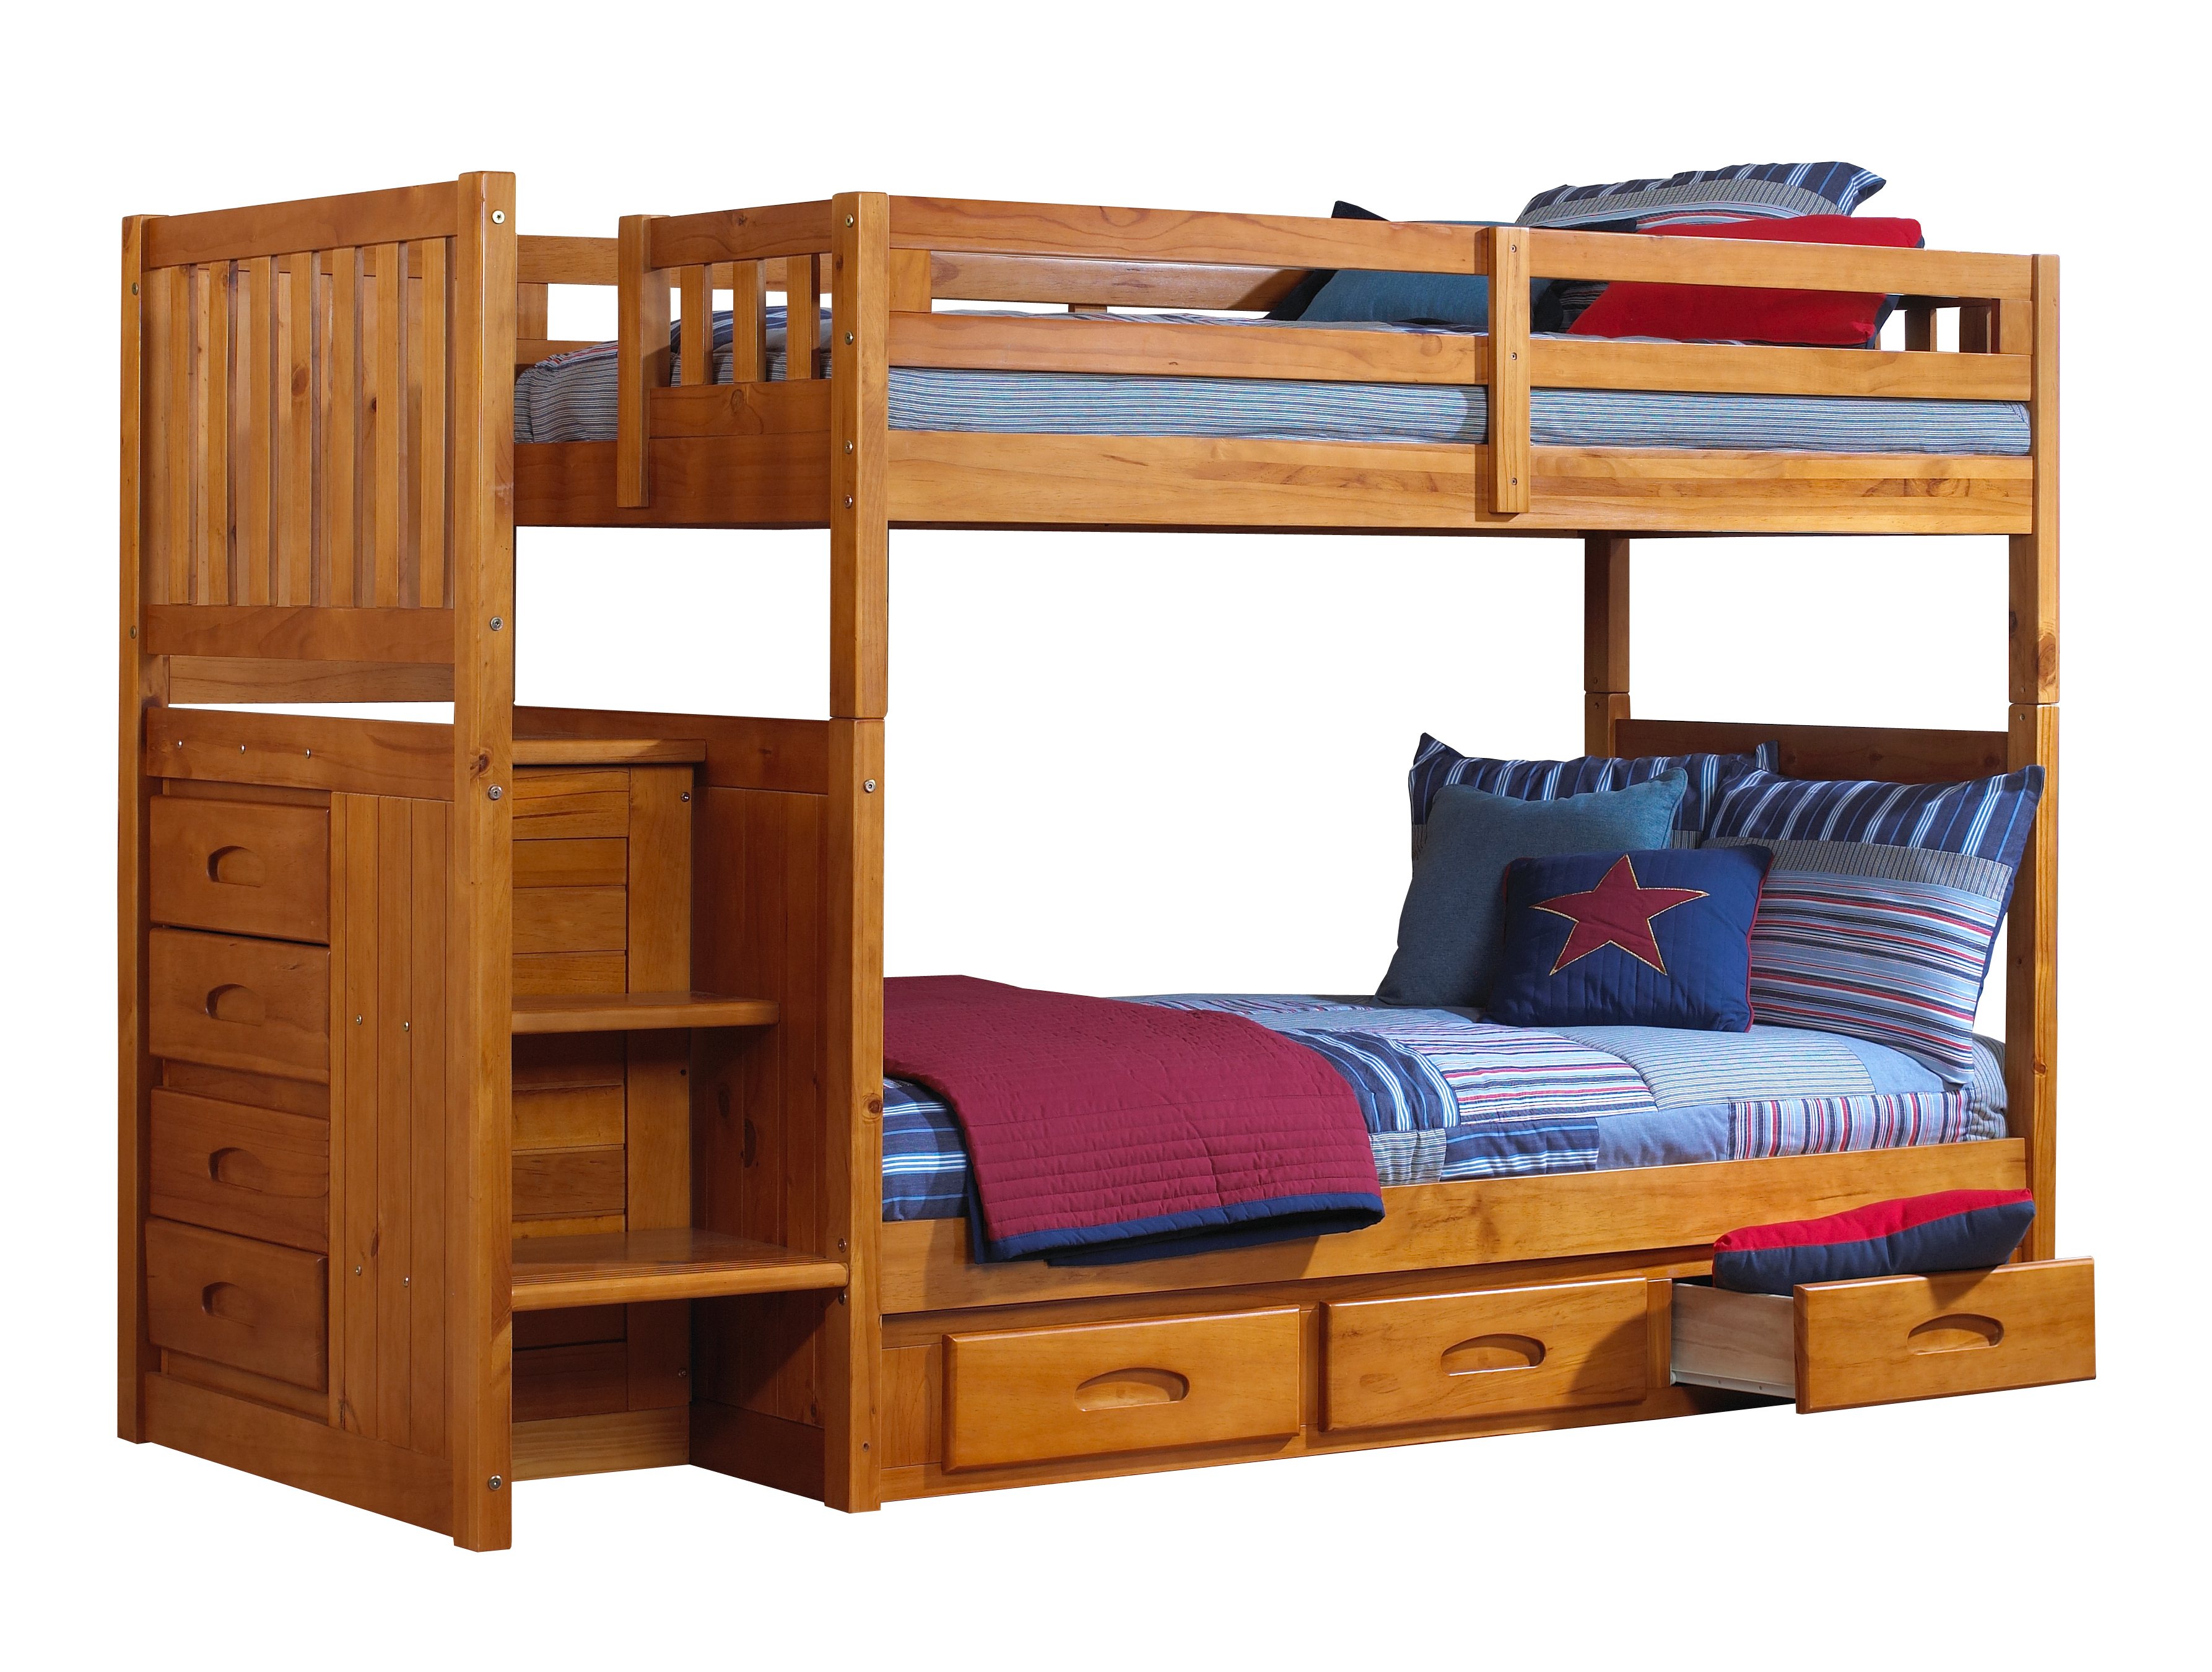 Discovery World Furniture Twin over Twin Honey Mission Staircase Bunk Beds